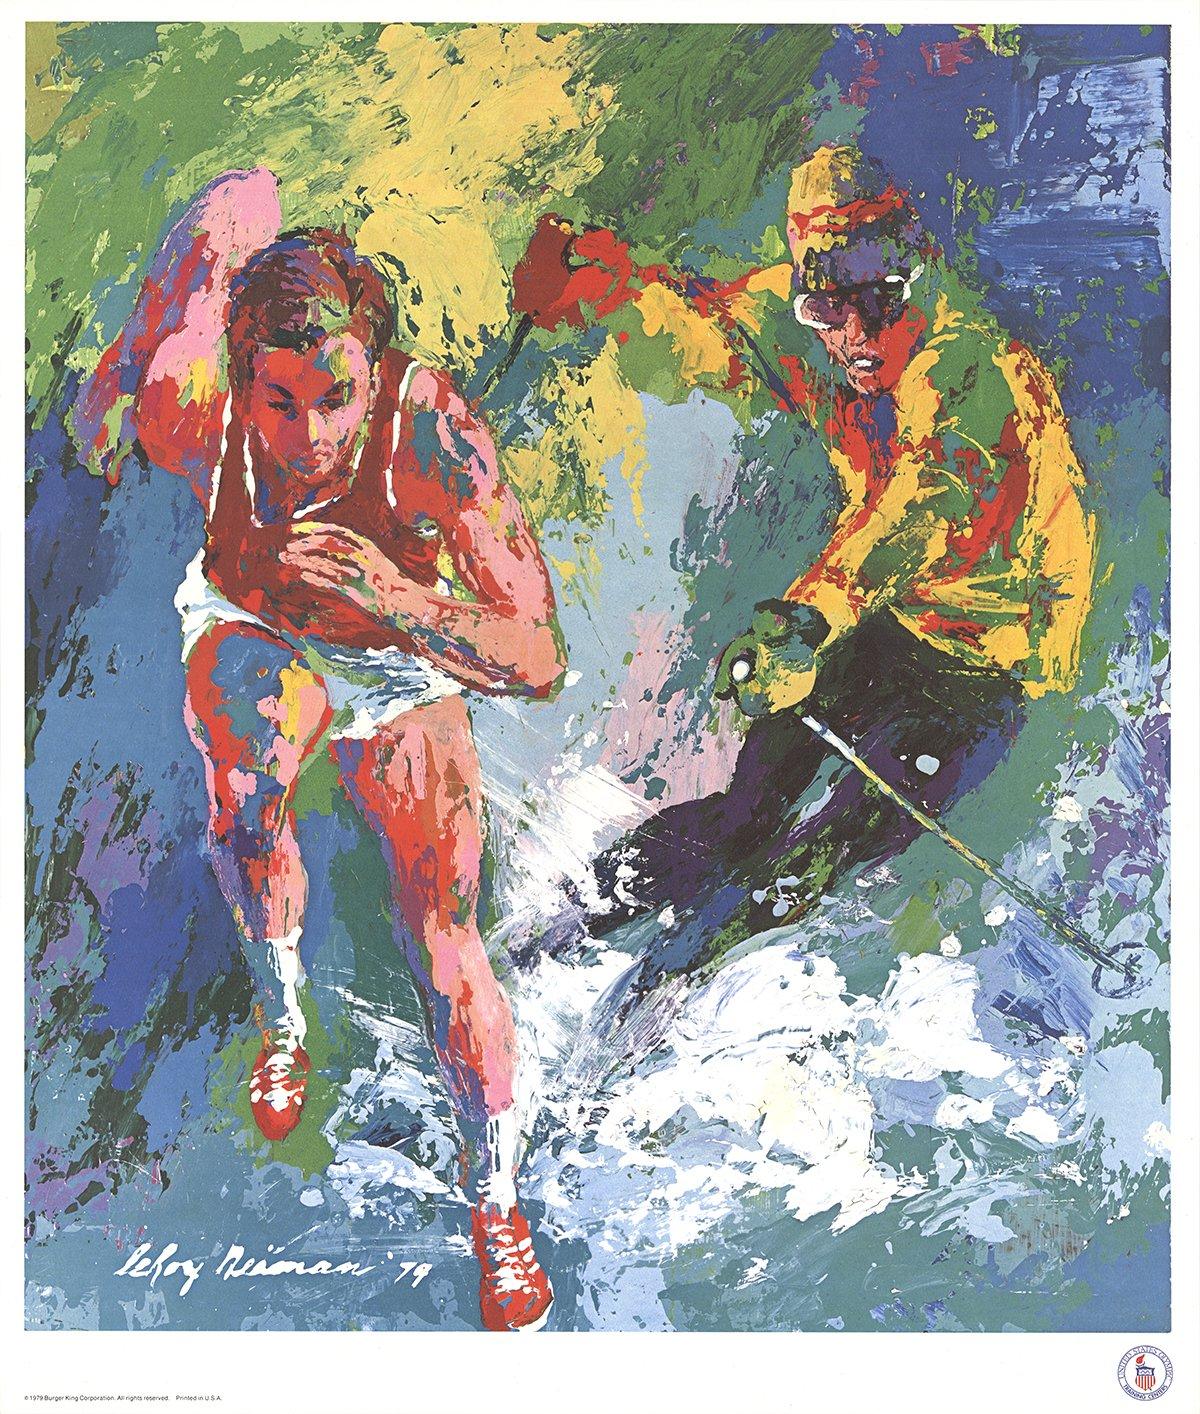 1979 After LeRoy Neiman 'Olympic Skier and Runner' Expressionism USA Offset - Print by Leroy Neiman